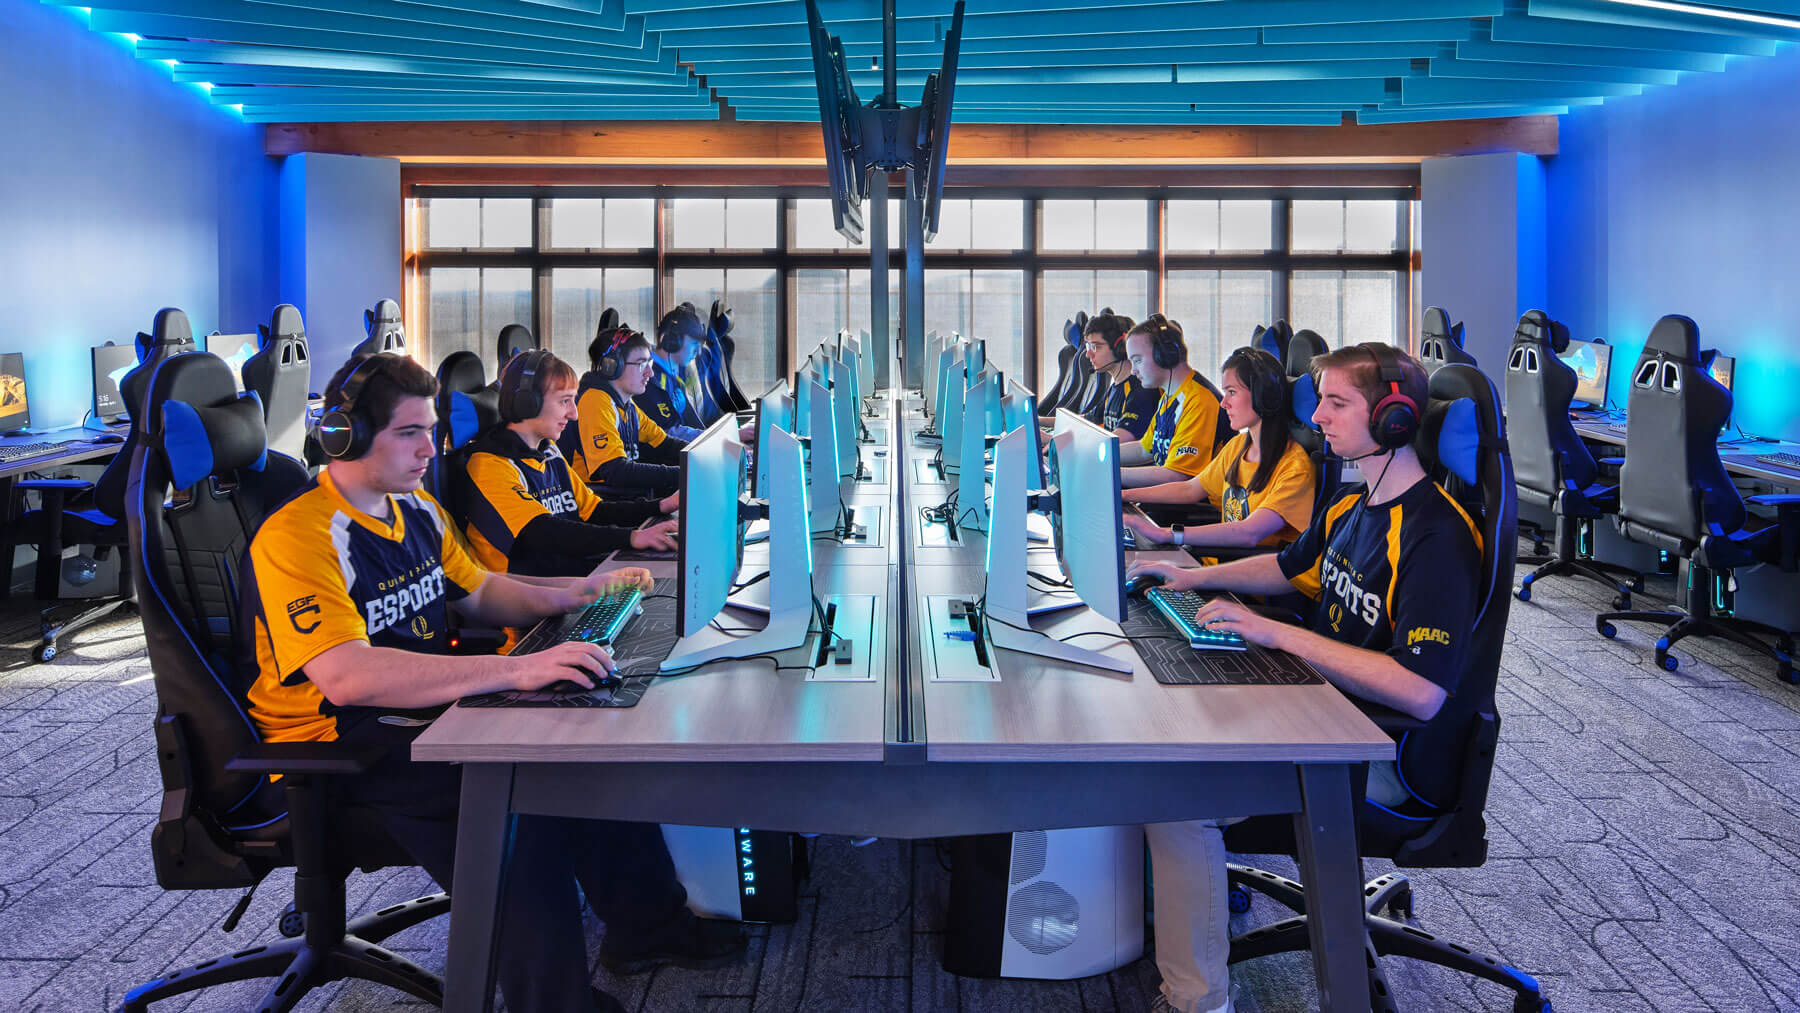 Quinnipiac students play video games in the eSports lounge.